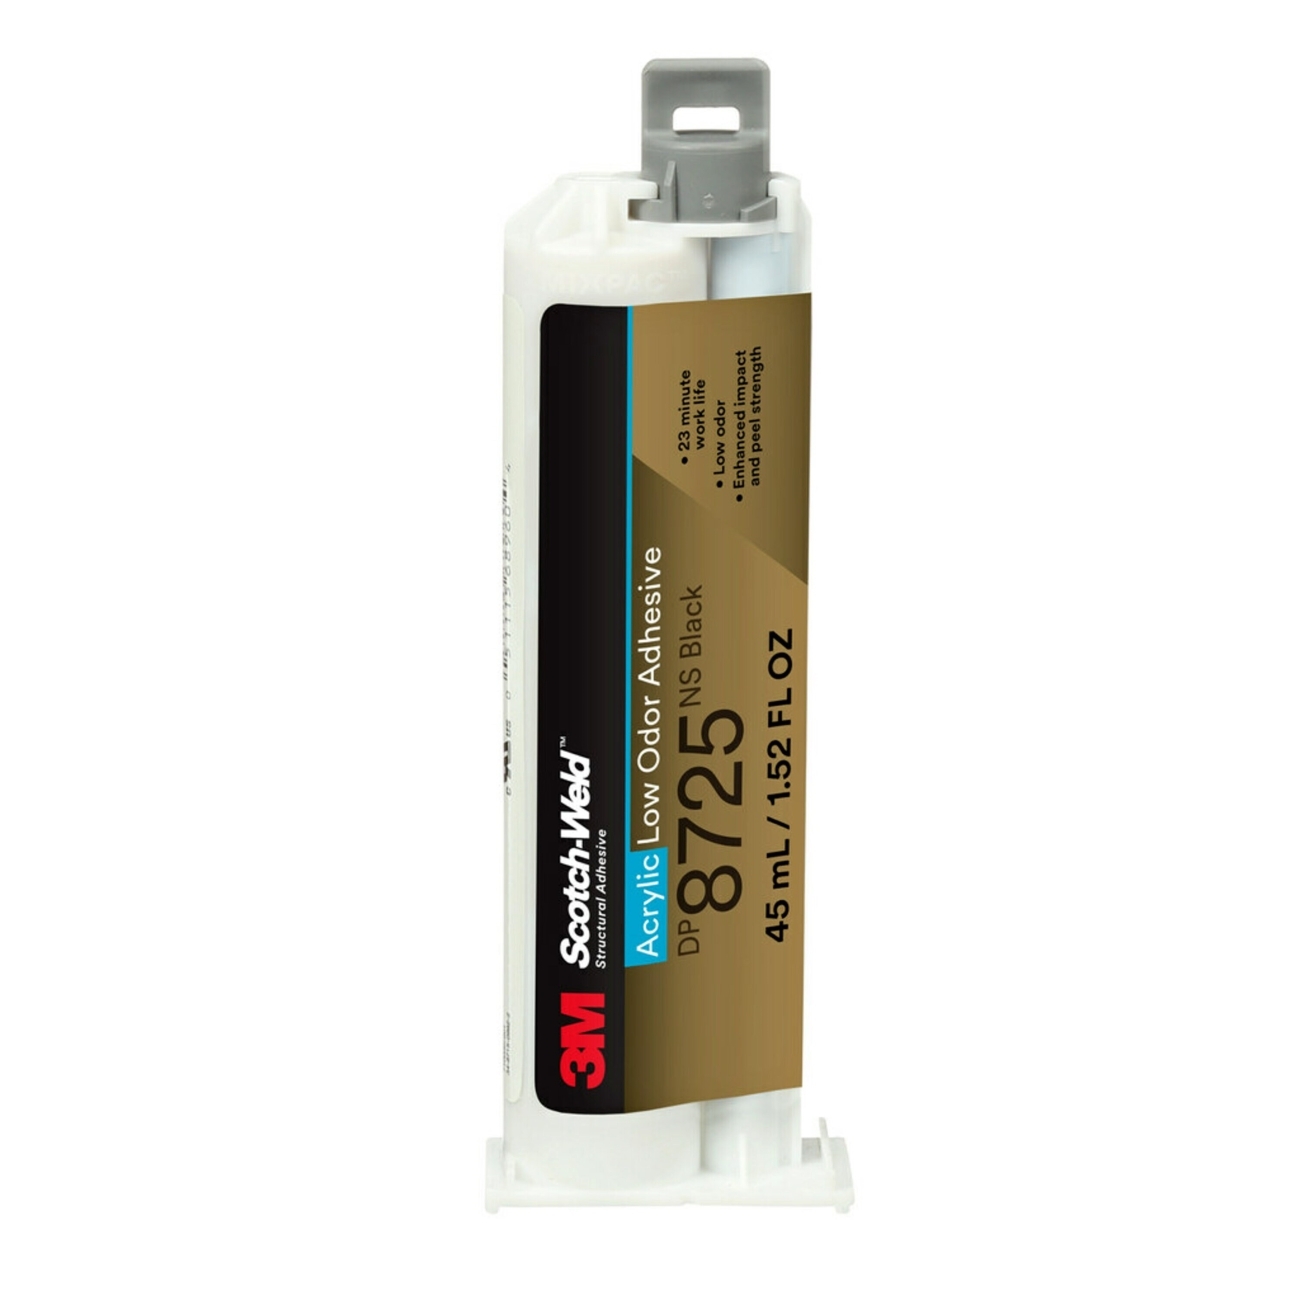 3M Scotch-Weld 2-component acrylate-based construction adhesive for the EPX system DP 8725 NS, black, 45 ml